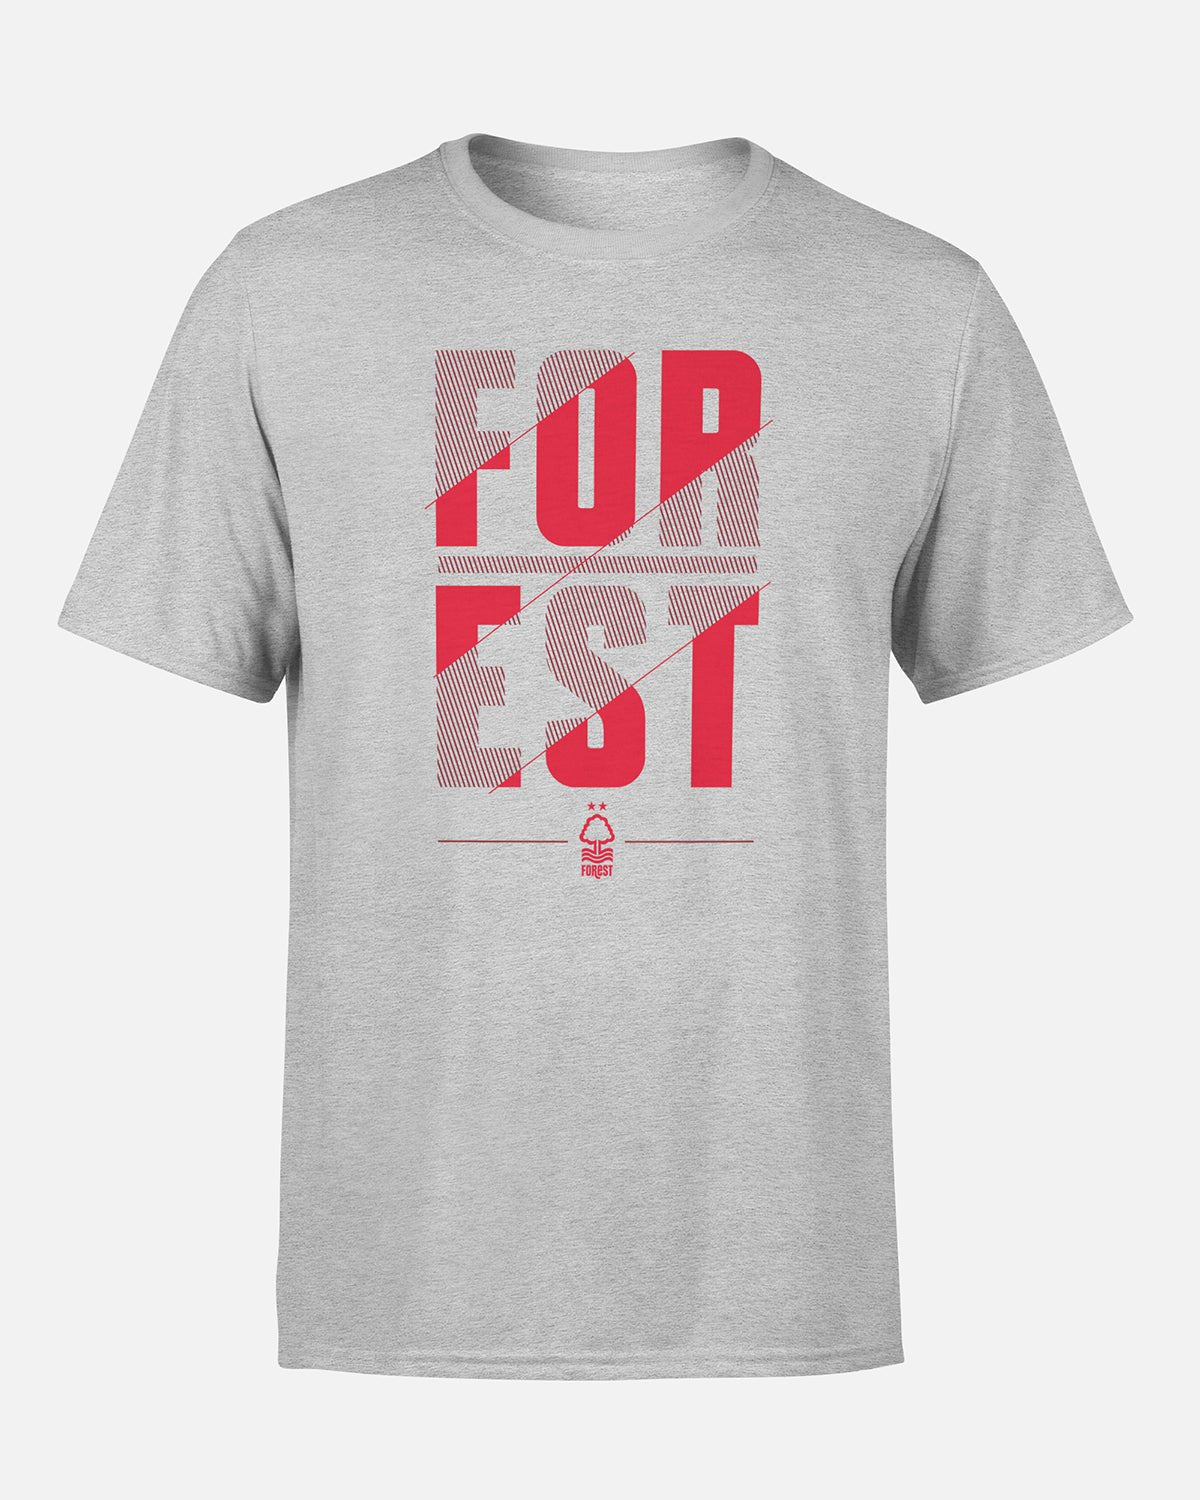 NFFC Adult Grey Stacked Forest T-Shirt - Nottingham Forest FC